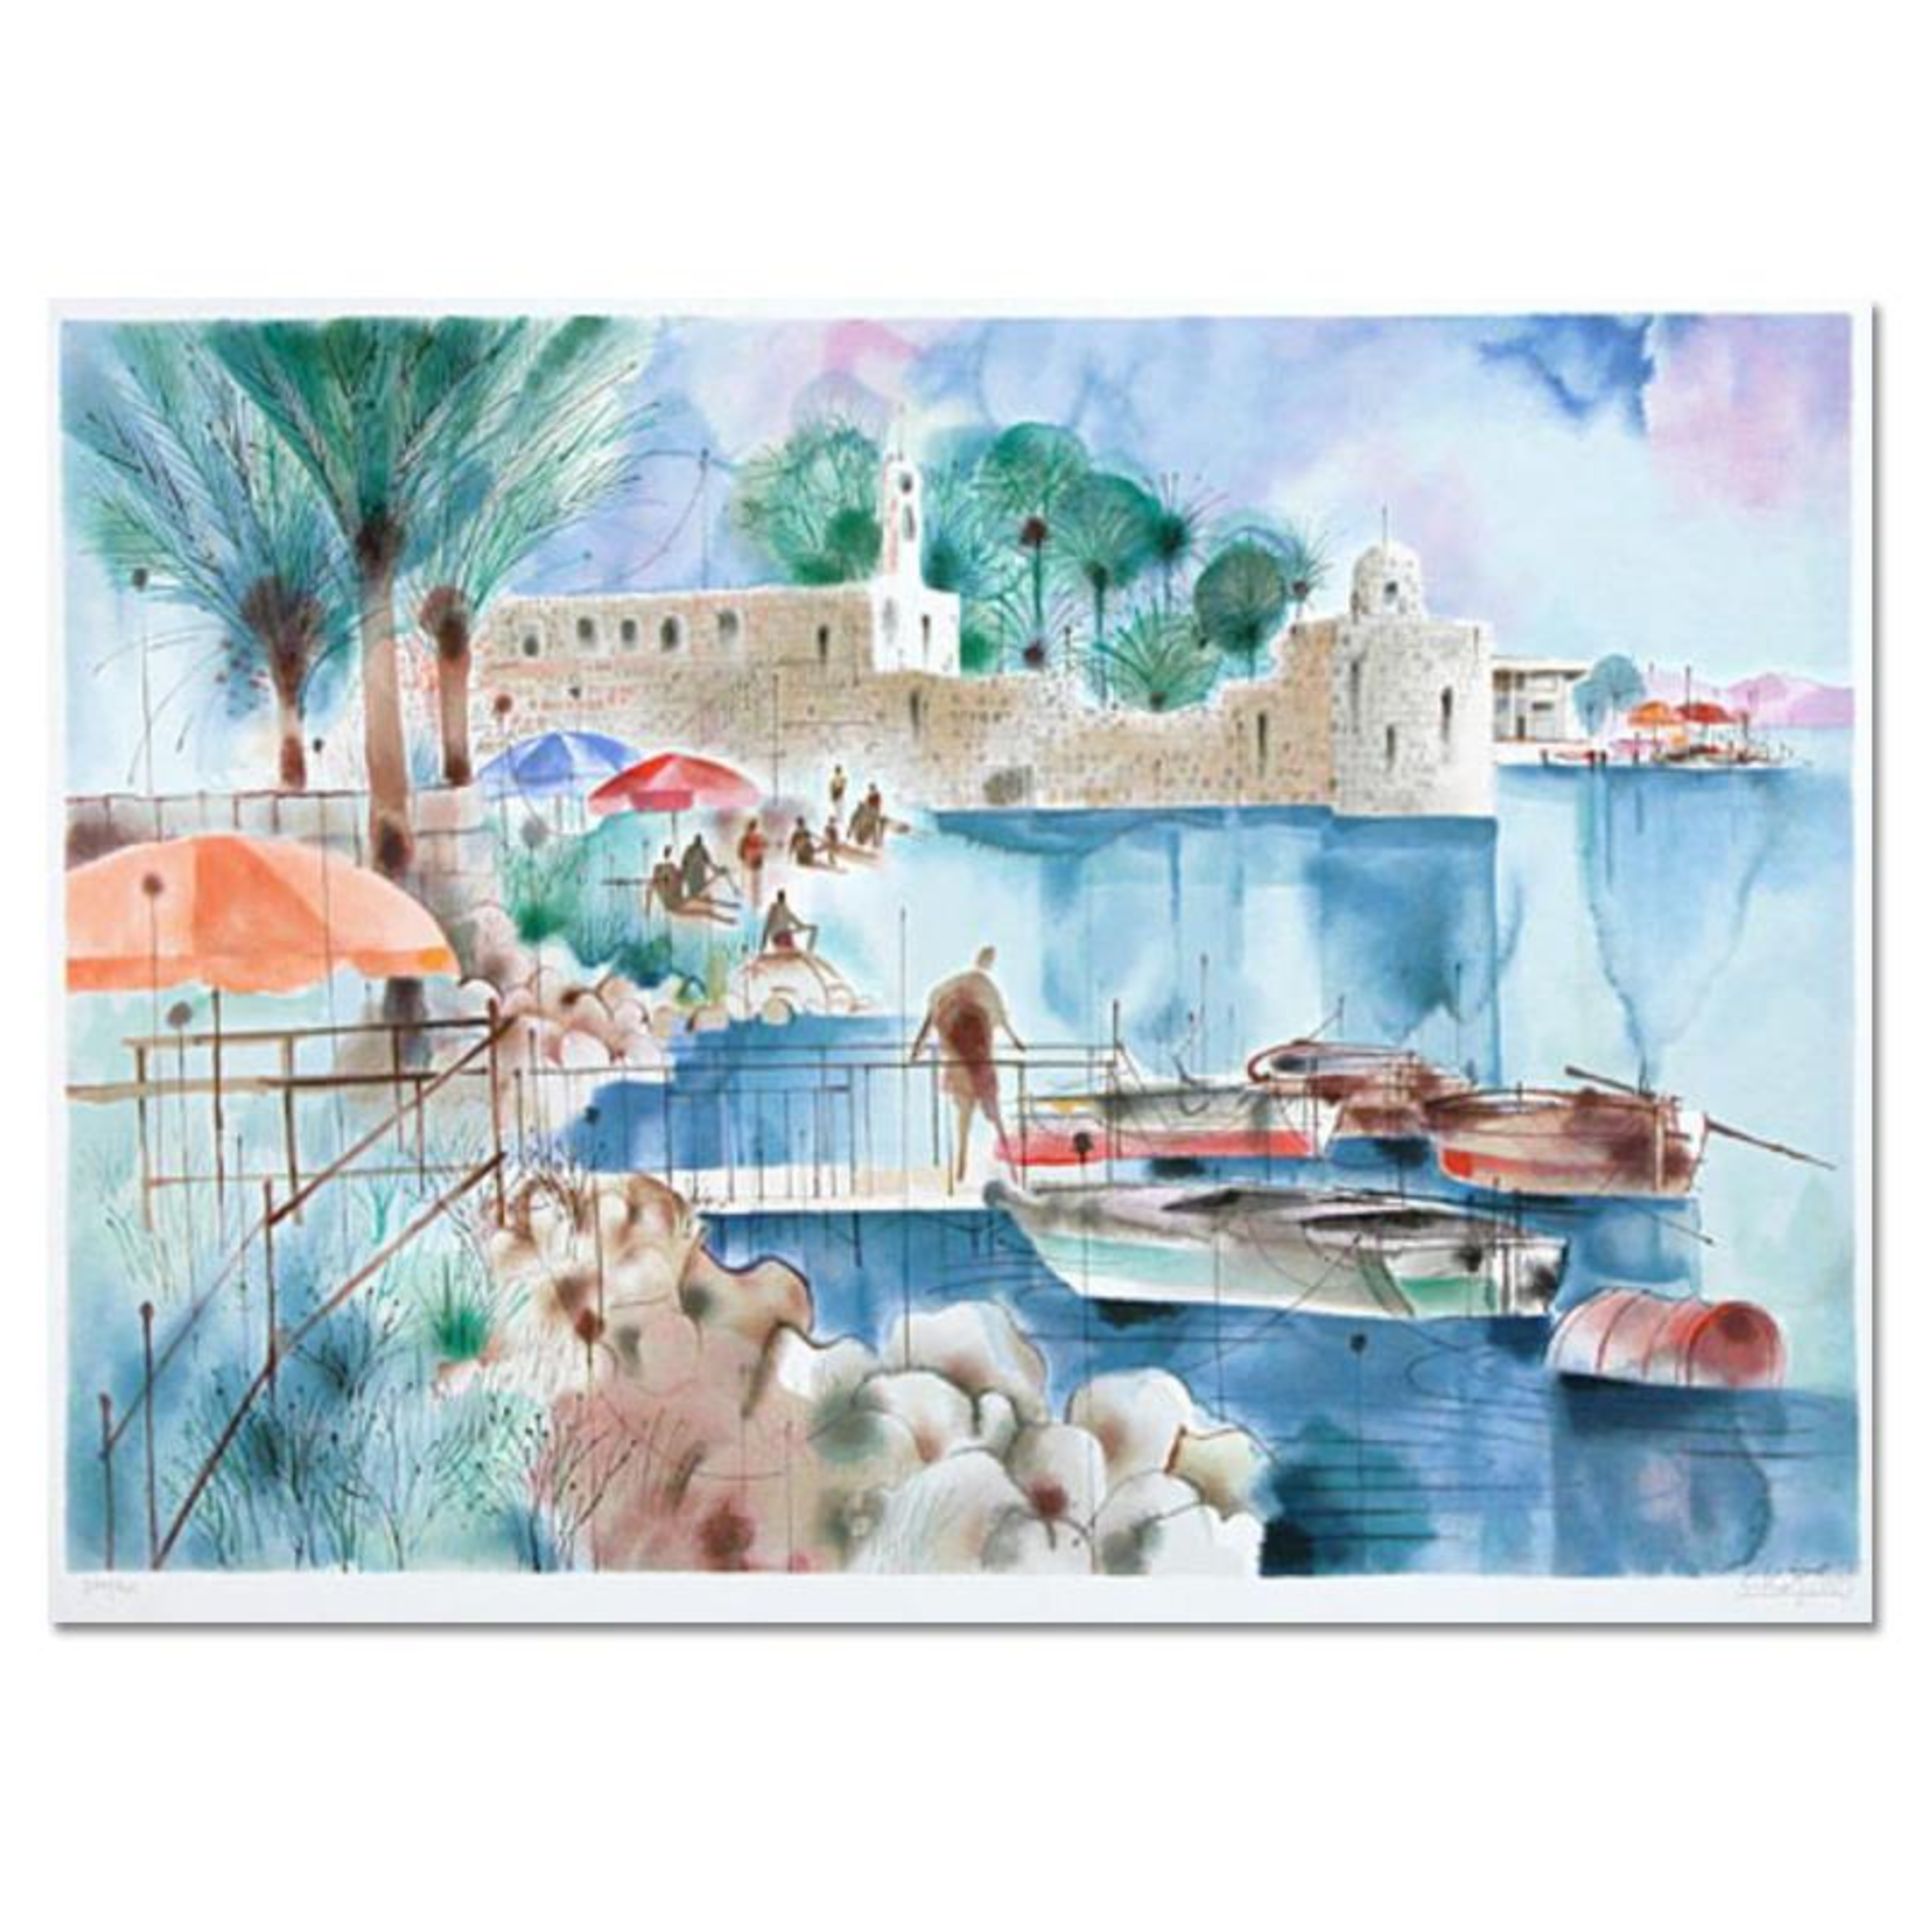 Shmuel Katz (1926-2010), "Ancient Fort" Hand Signed Limited Edition Serigraph wi